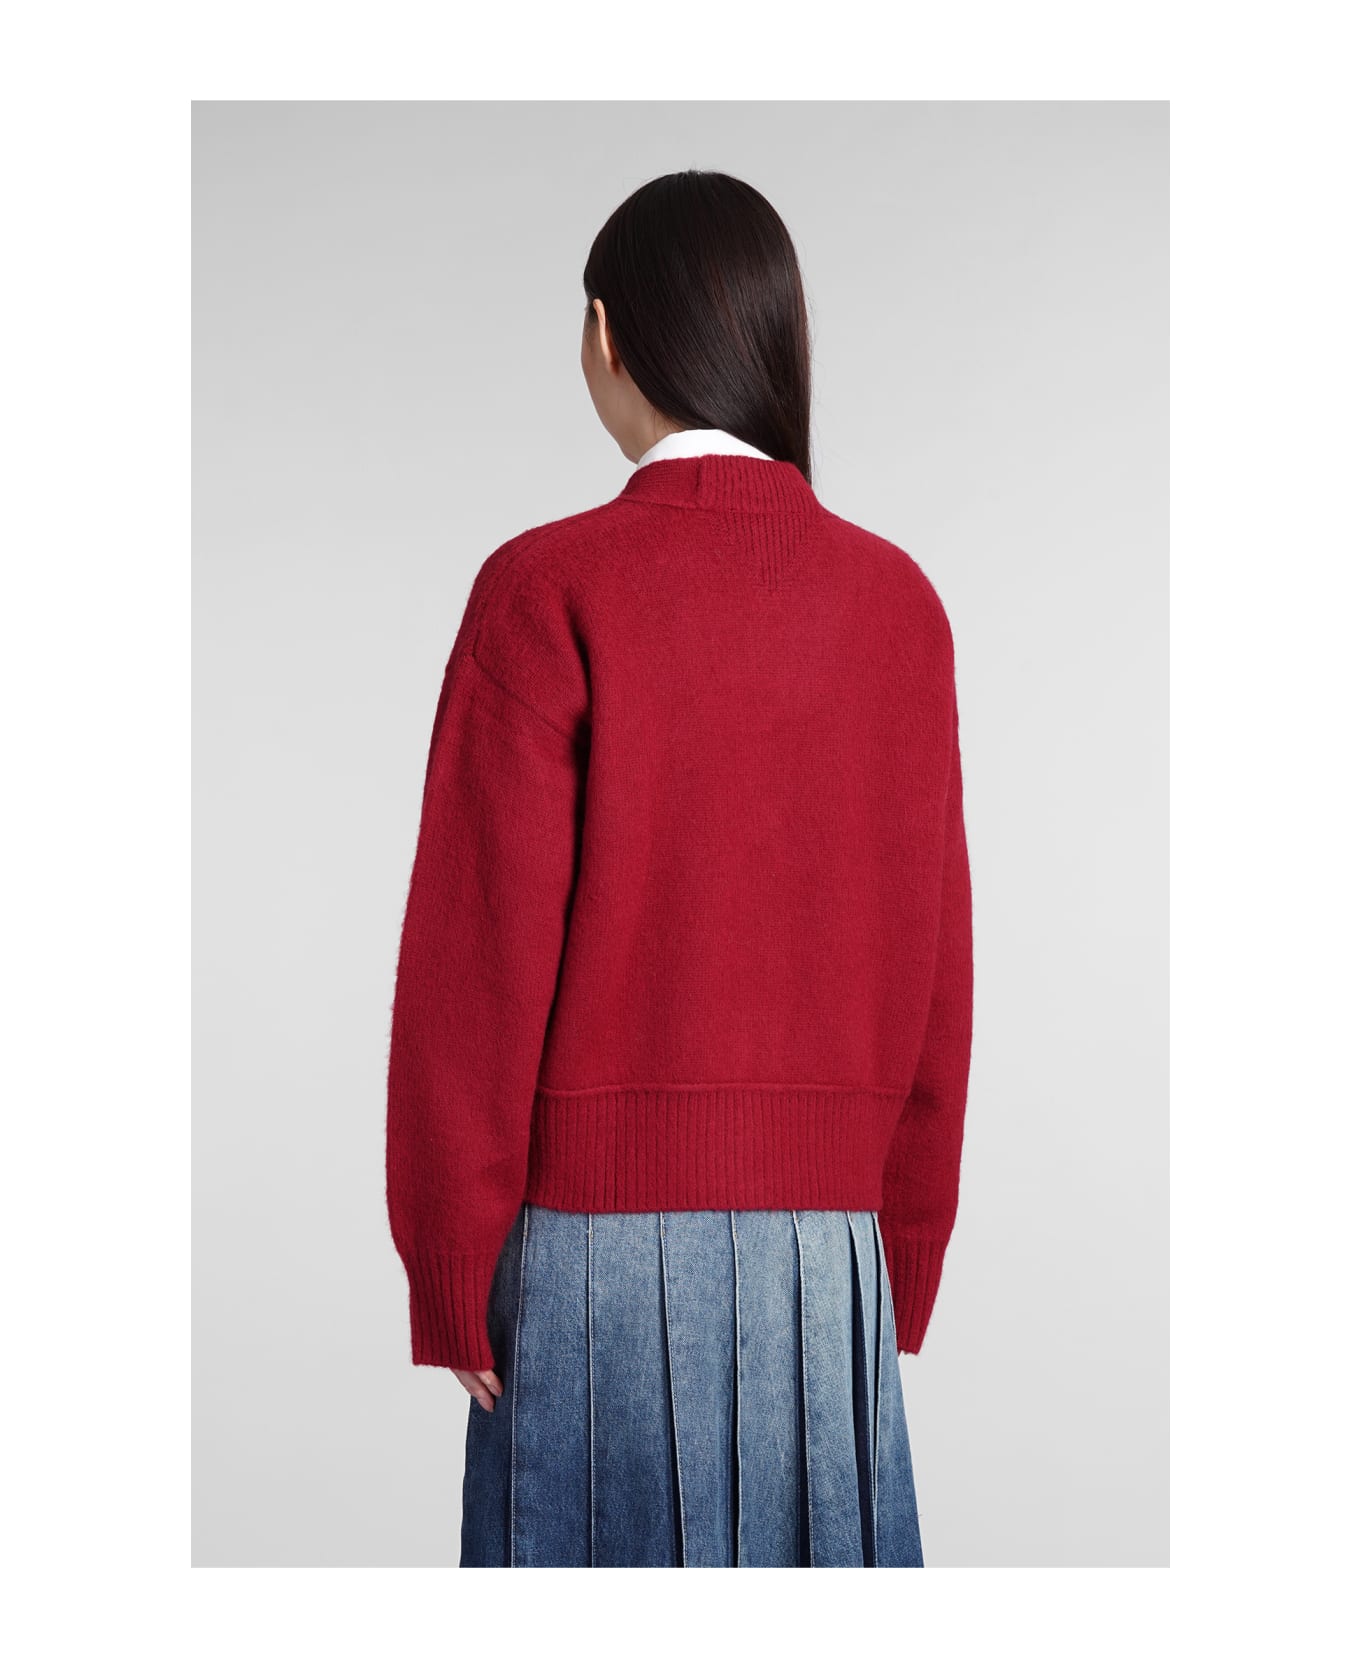 Tommy Hilfiger Cardigan In Bordeaux Wool - Red